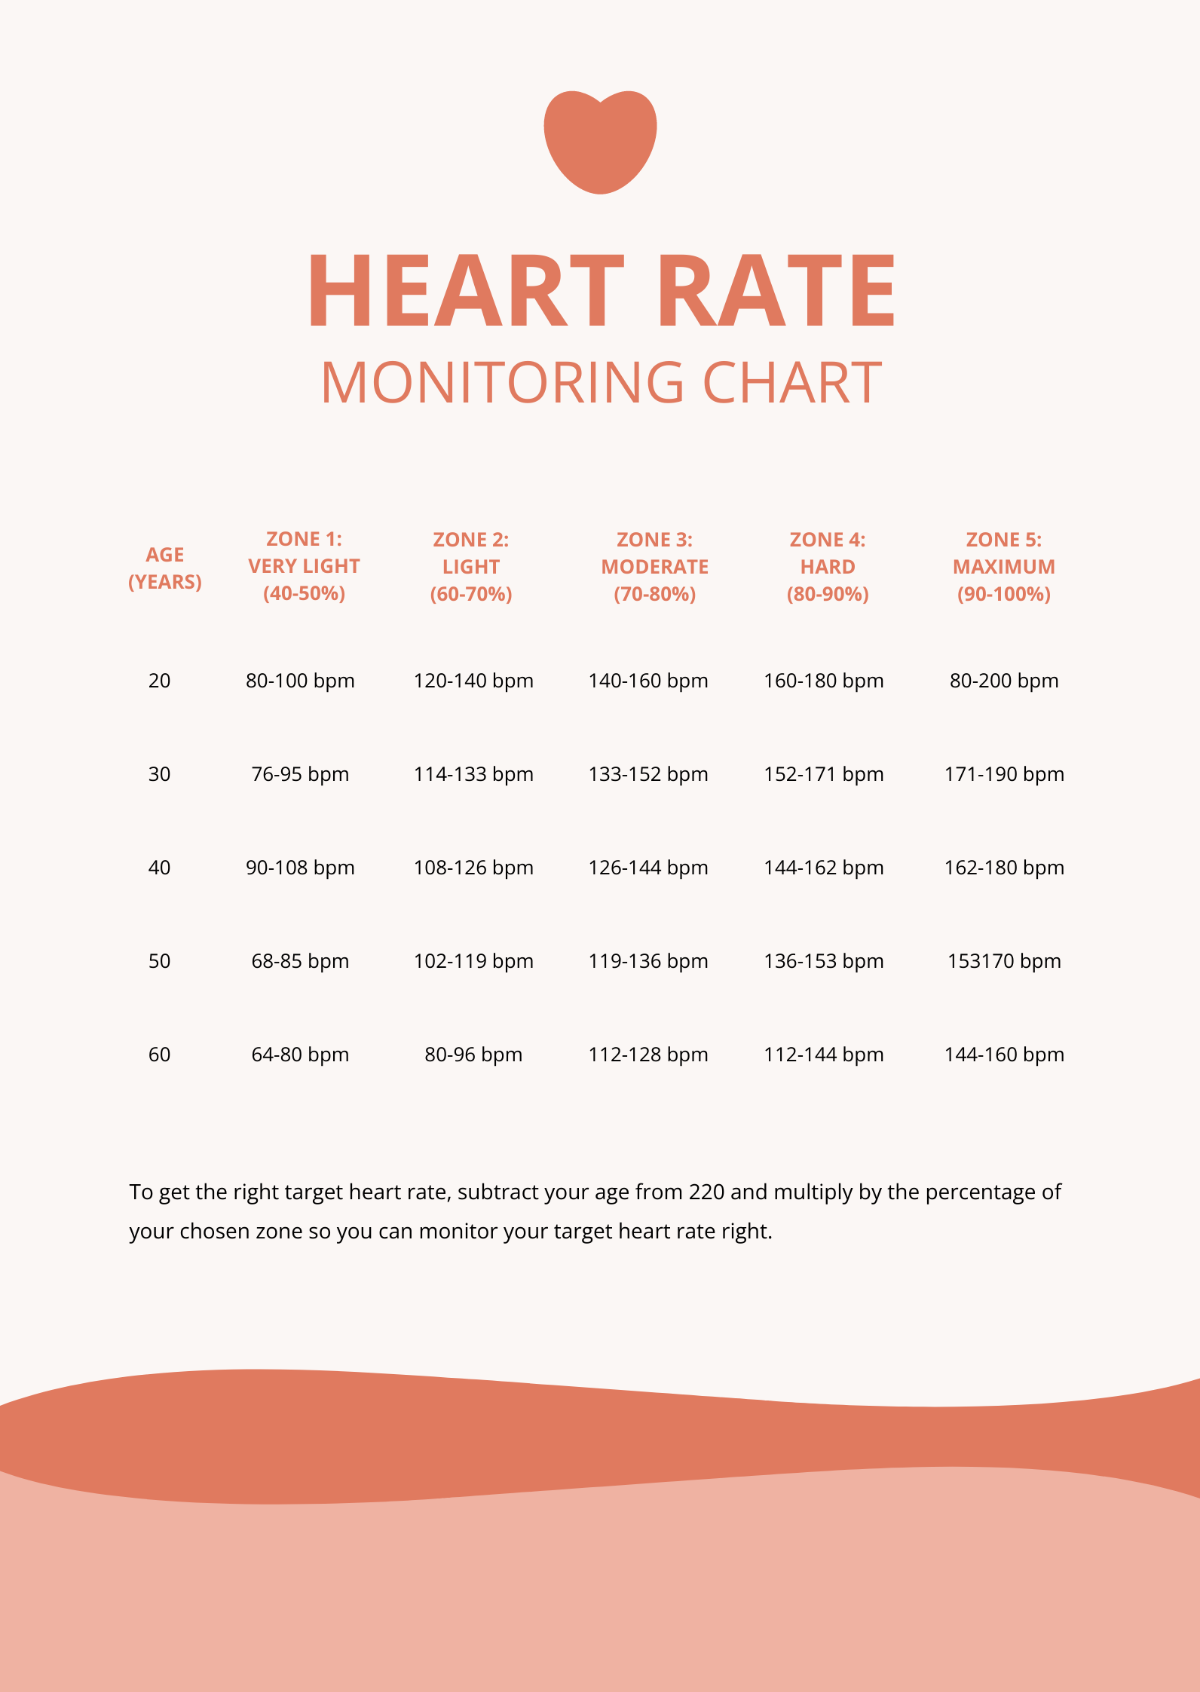 Heart Rate Monitoring Chart